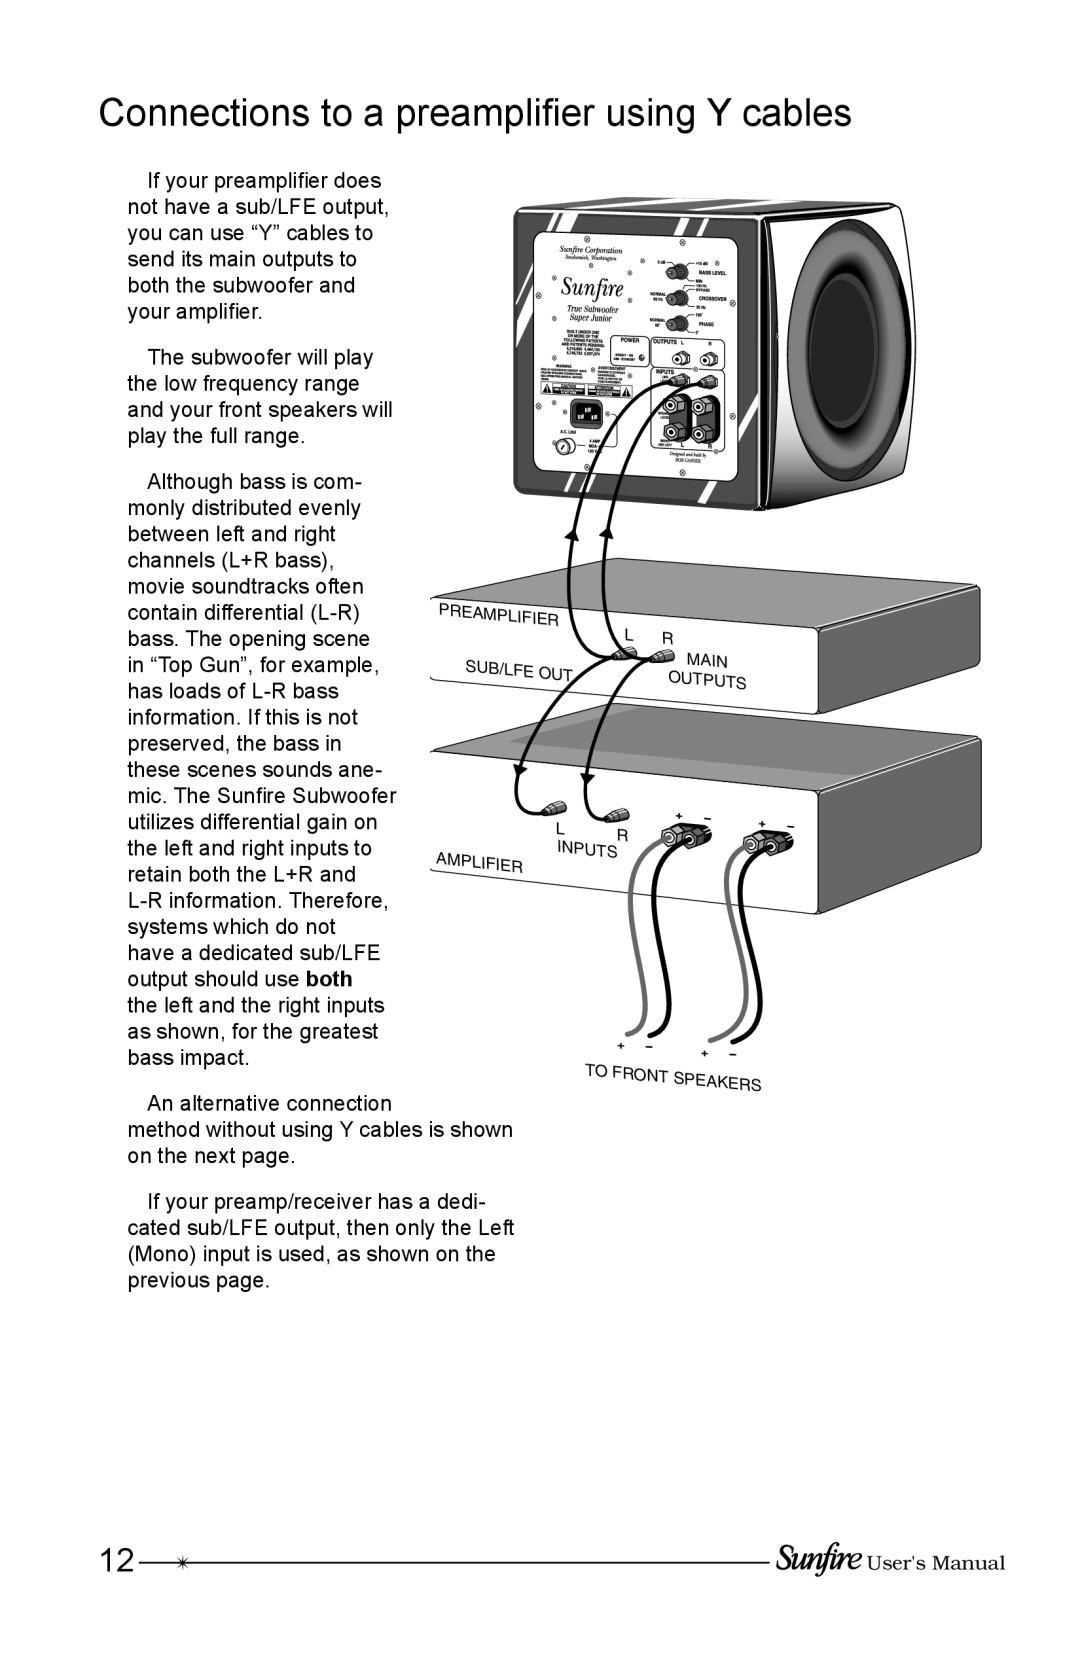 Sunfire Home Theater System manual Connections to a preampliﬁer using Y cables 